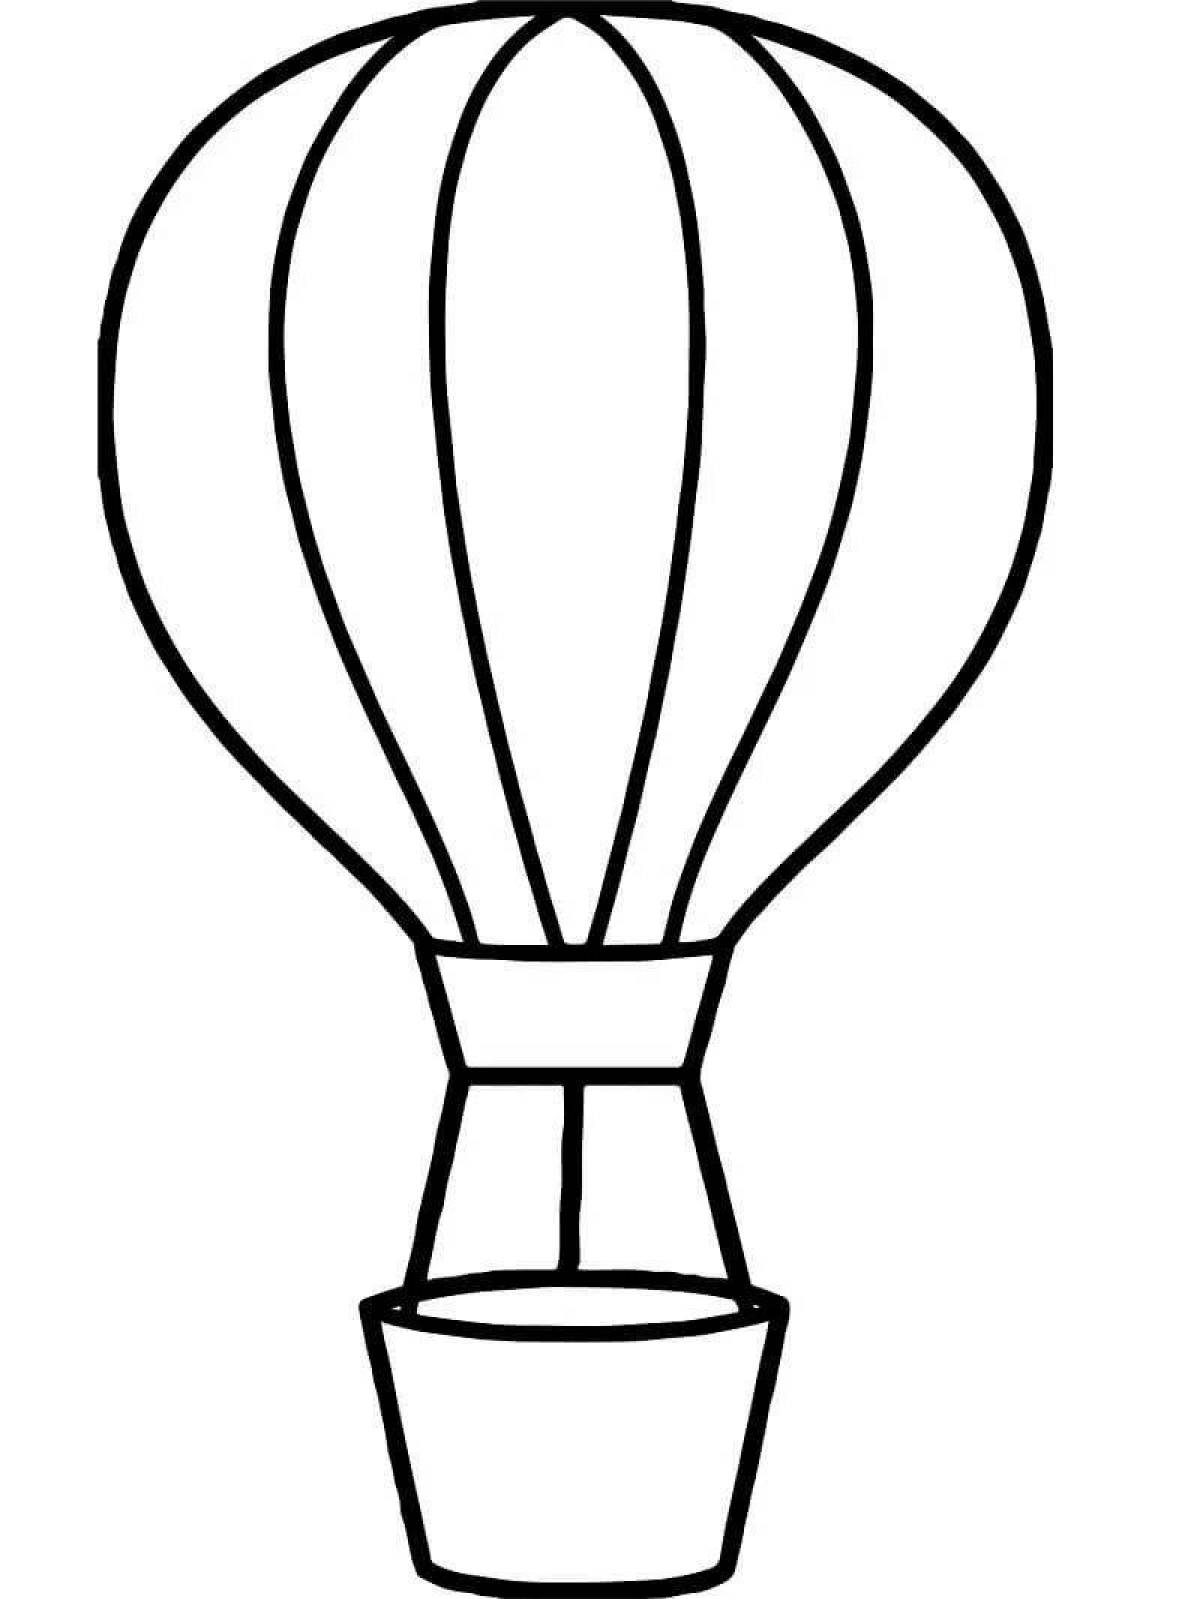 Magic balloon with a basket coloring book for kids